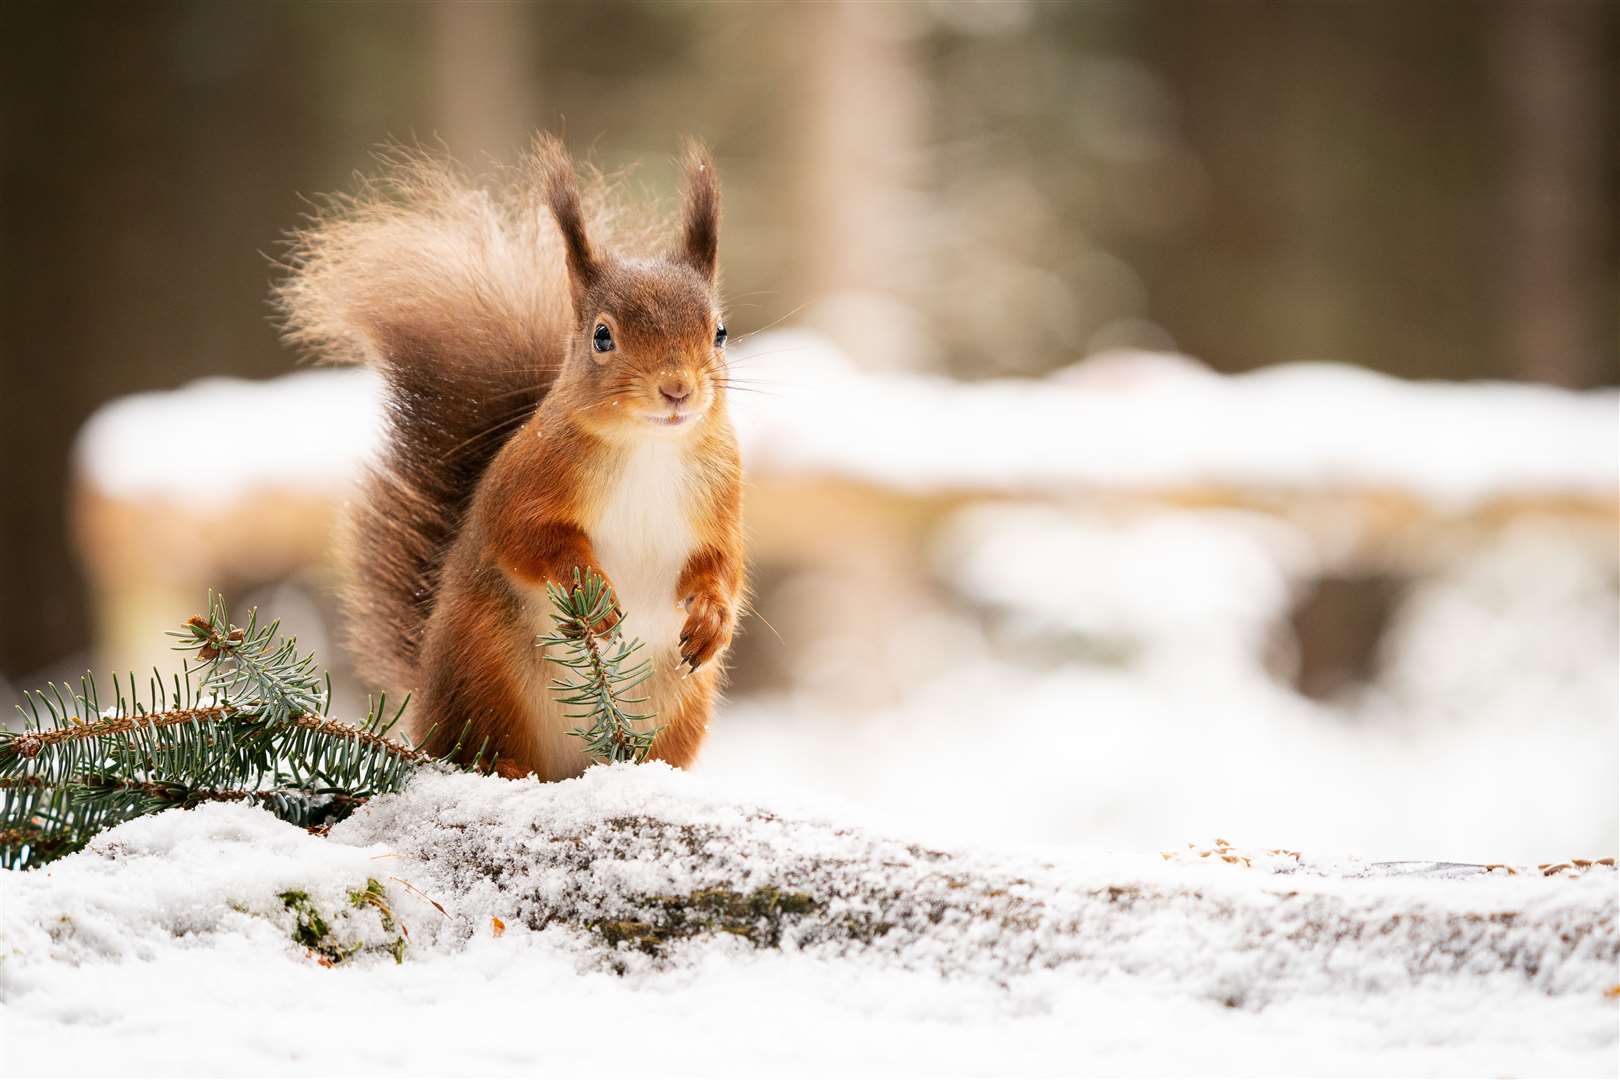 This squirrel was caught enjoying the snow by Christopher Reid.